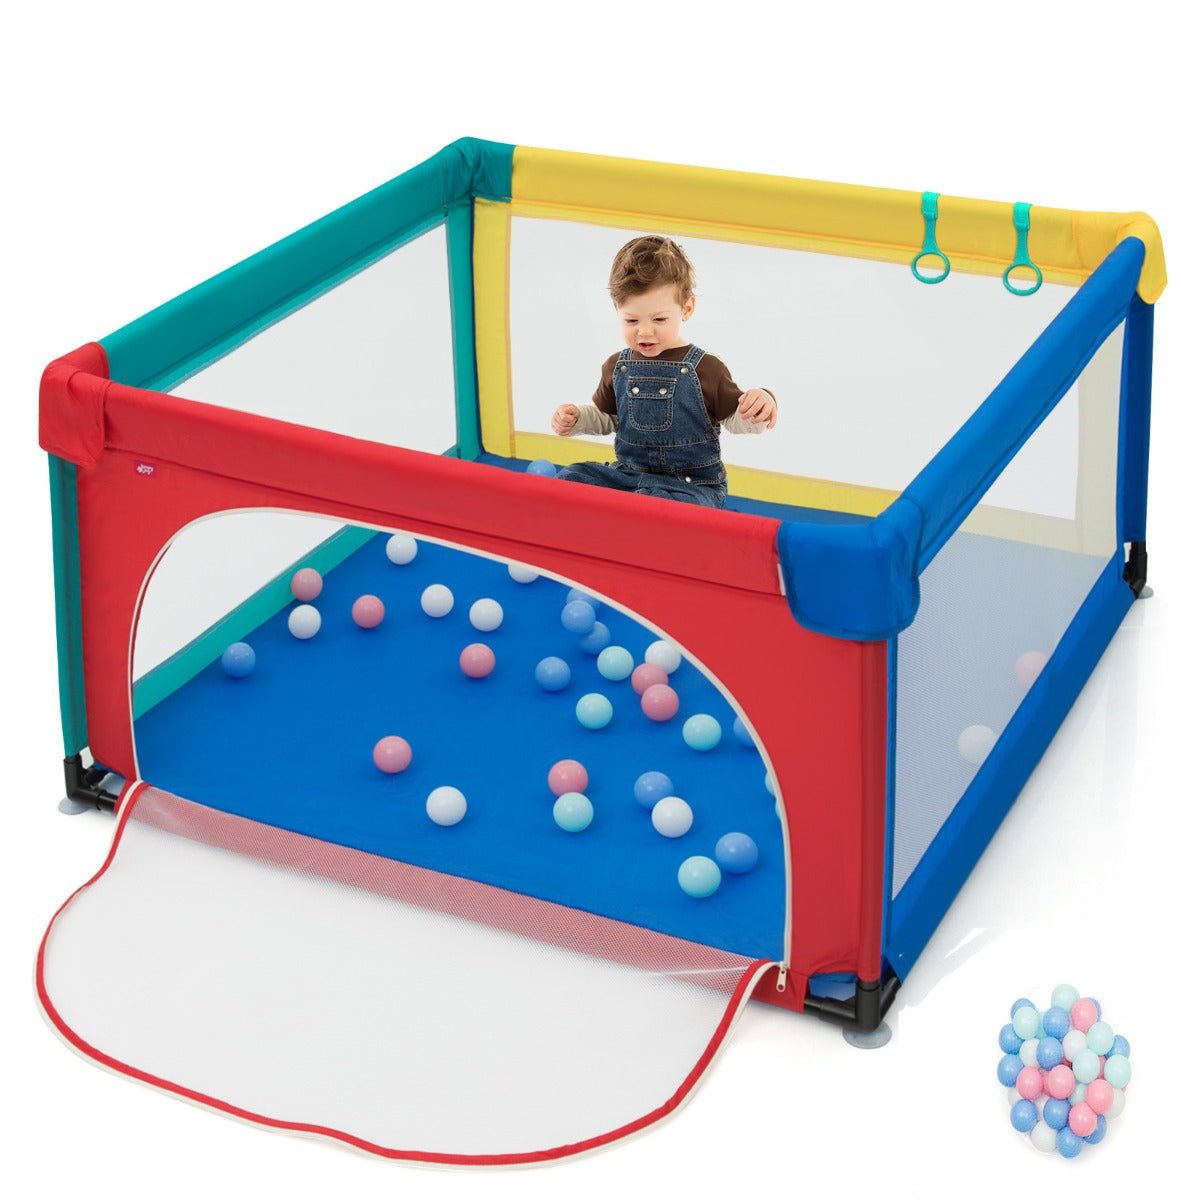 Multi-Color Baby Playpen - Where Imagination Takes Flight